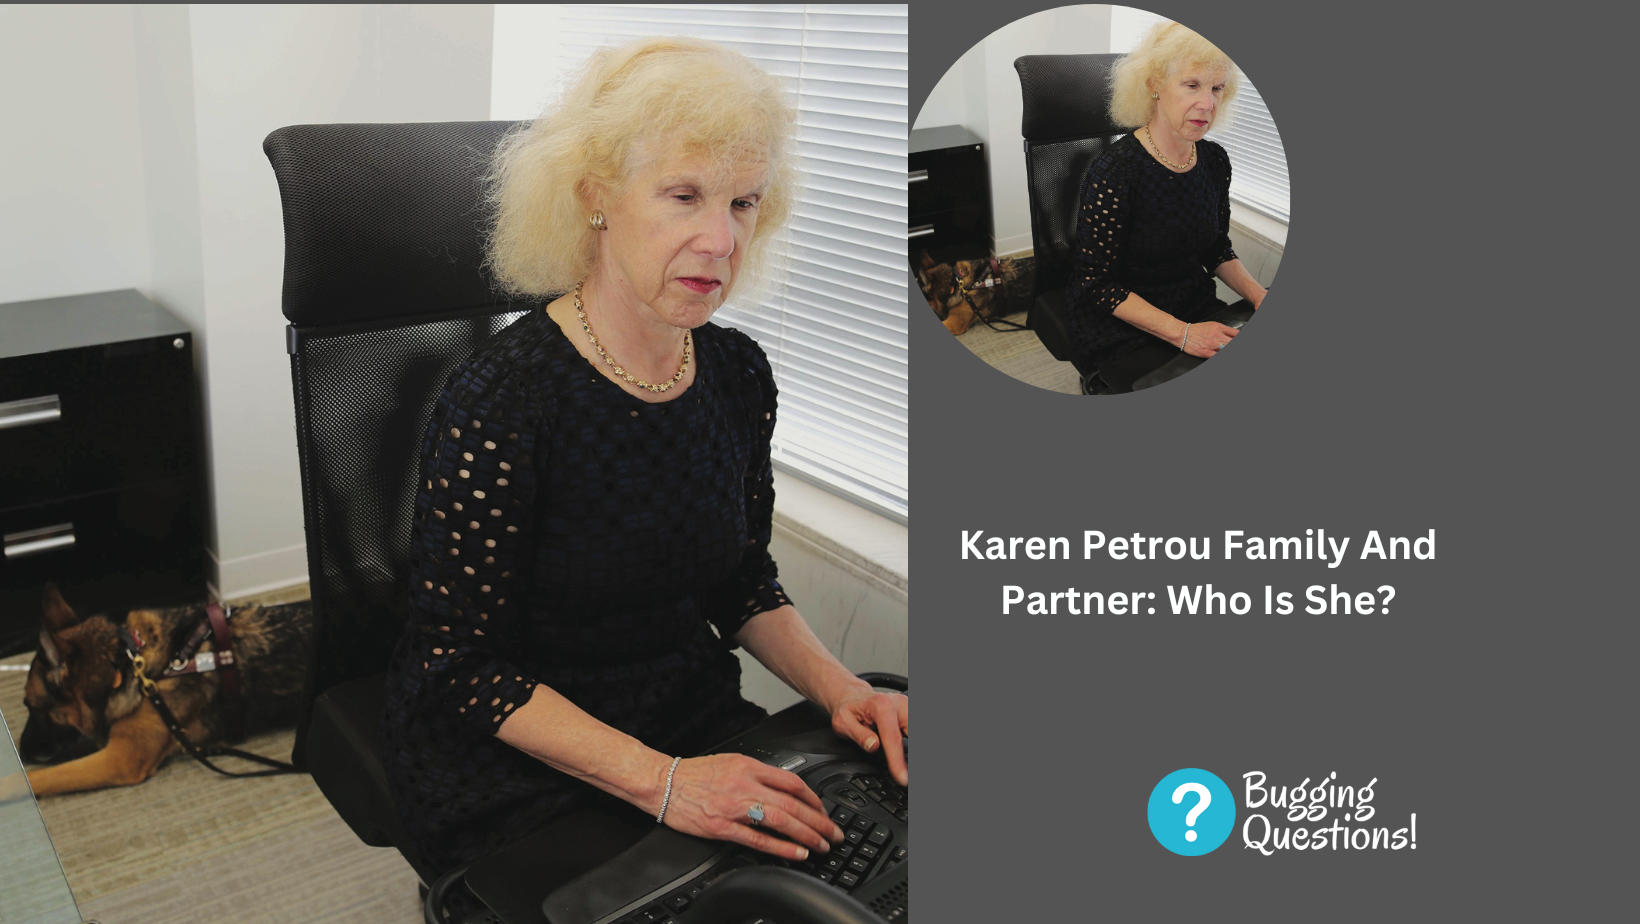 Karen Petrou Family And Partner: Who Is She?